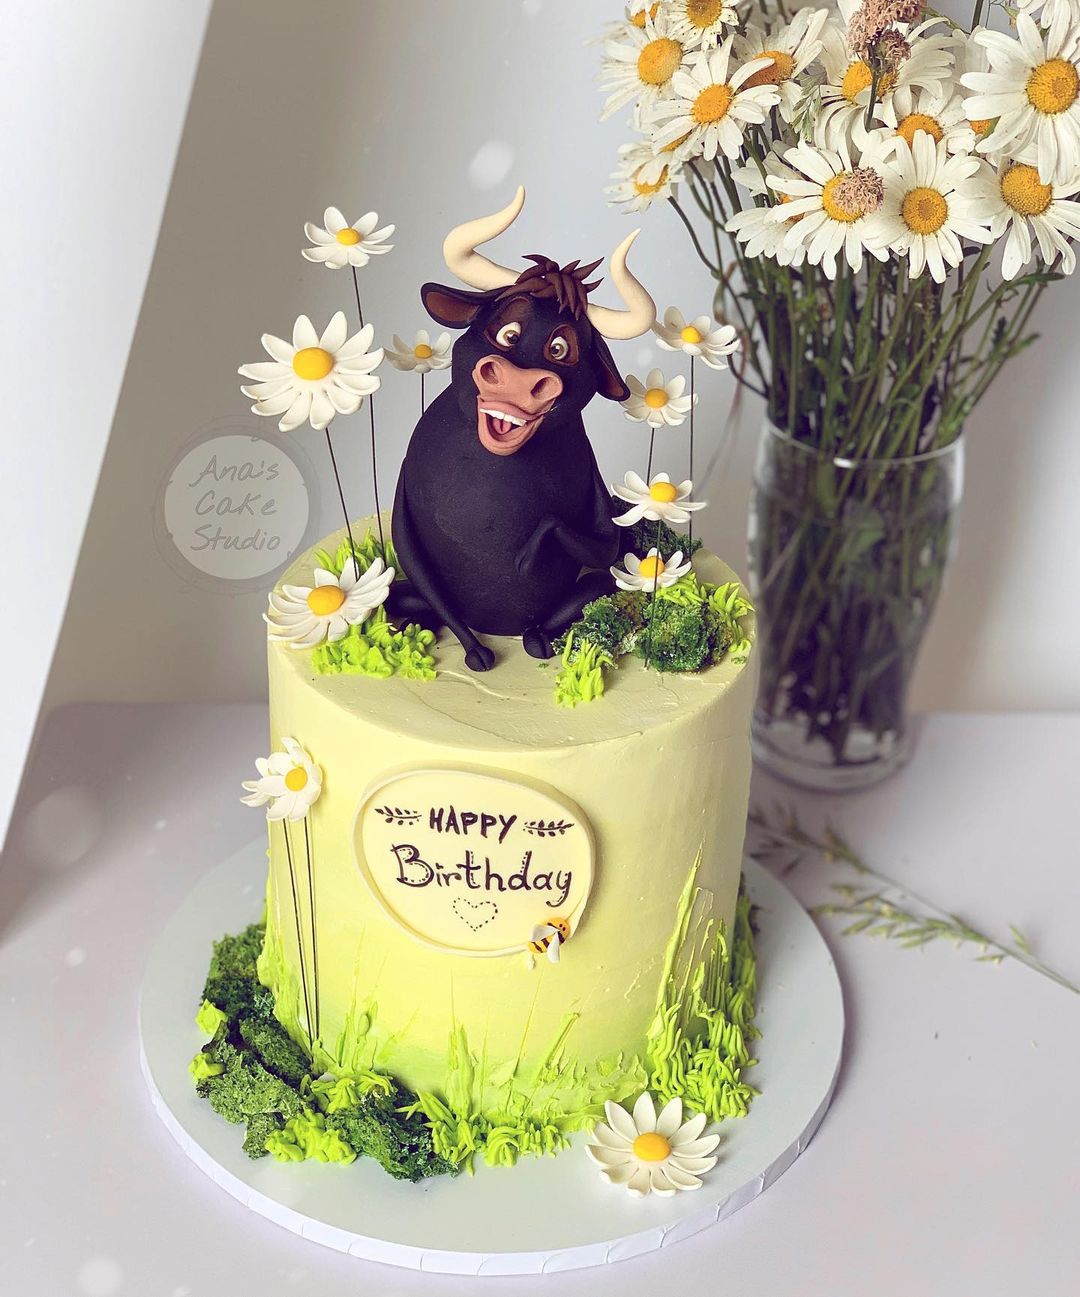 Ferdinand-Themed Cake With Daisies